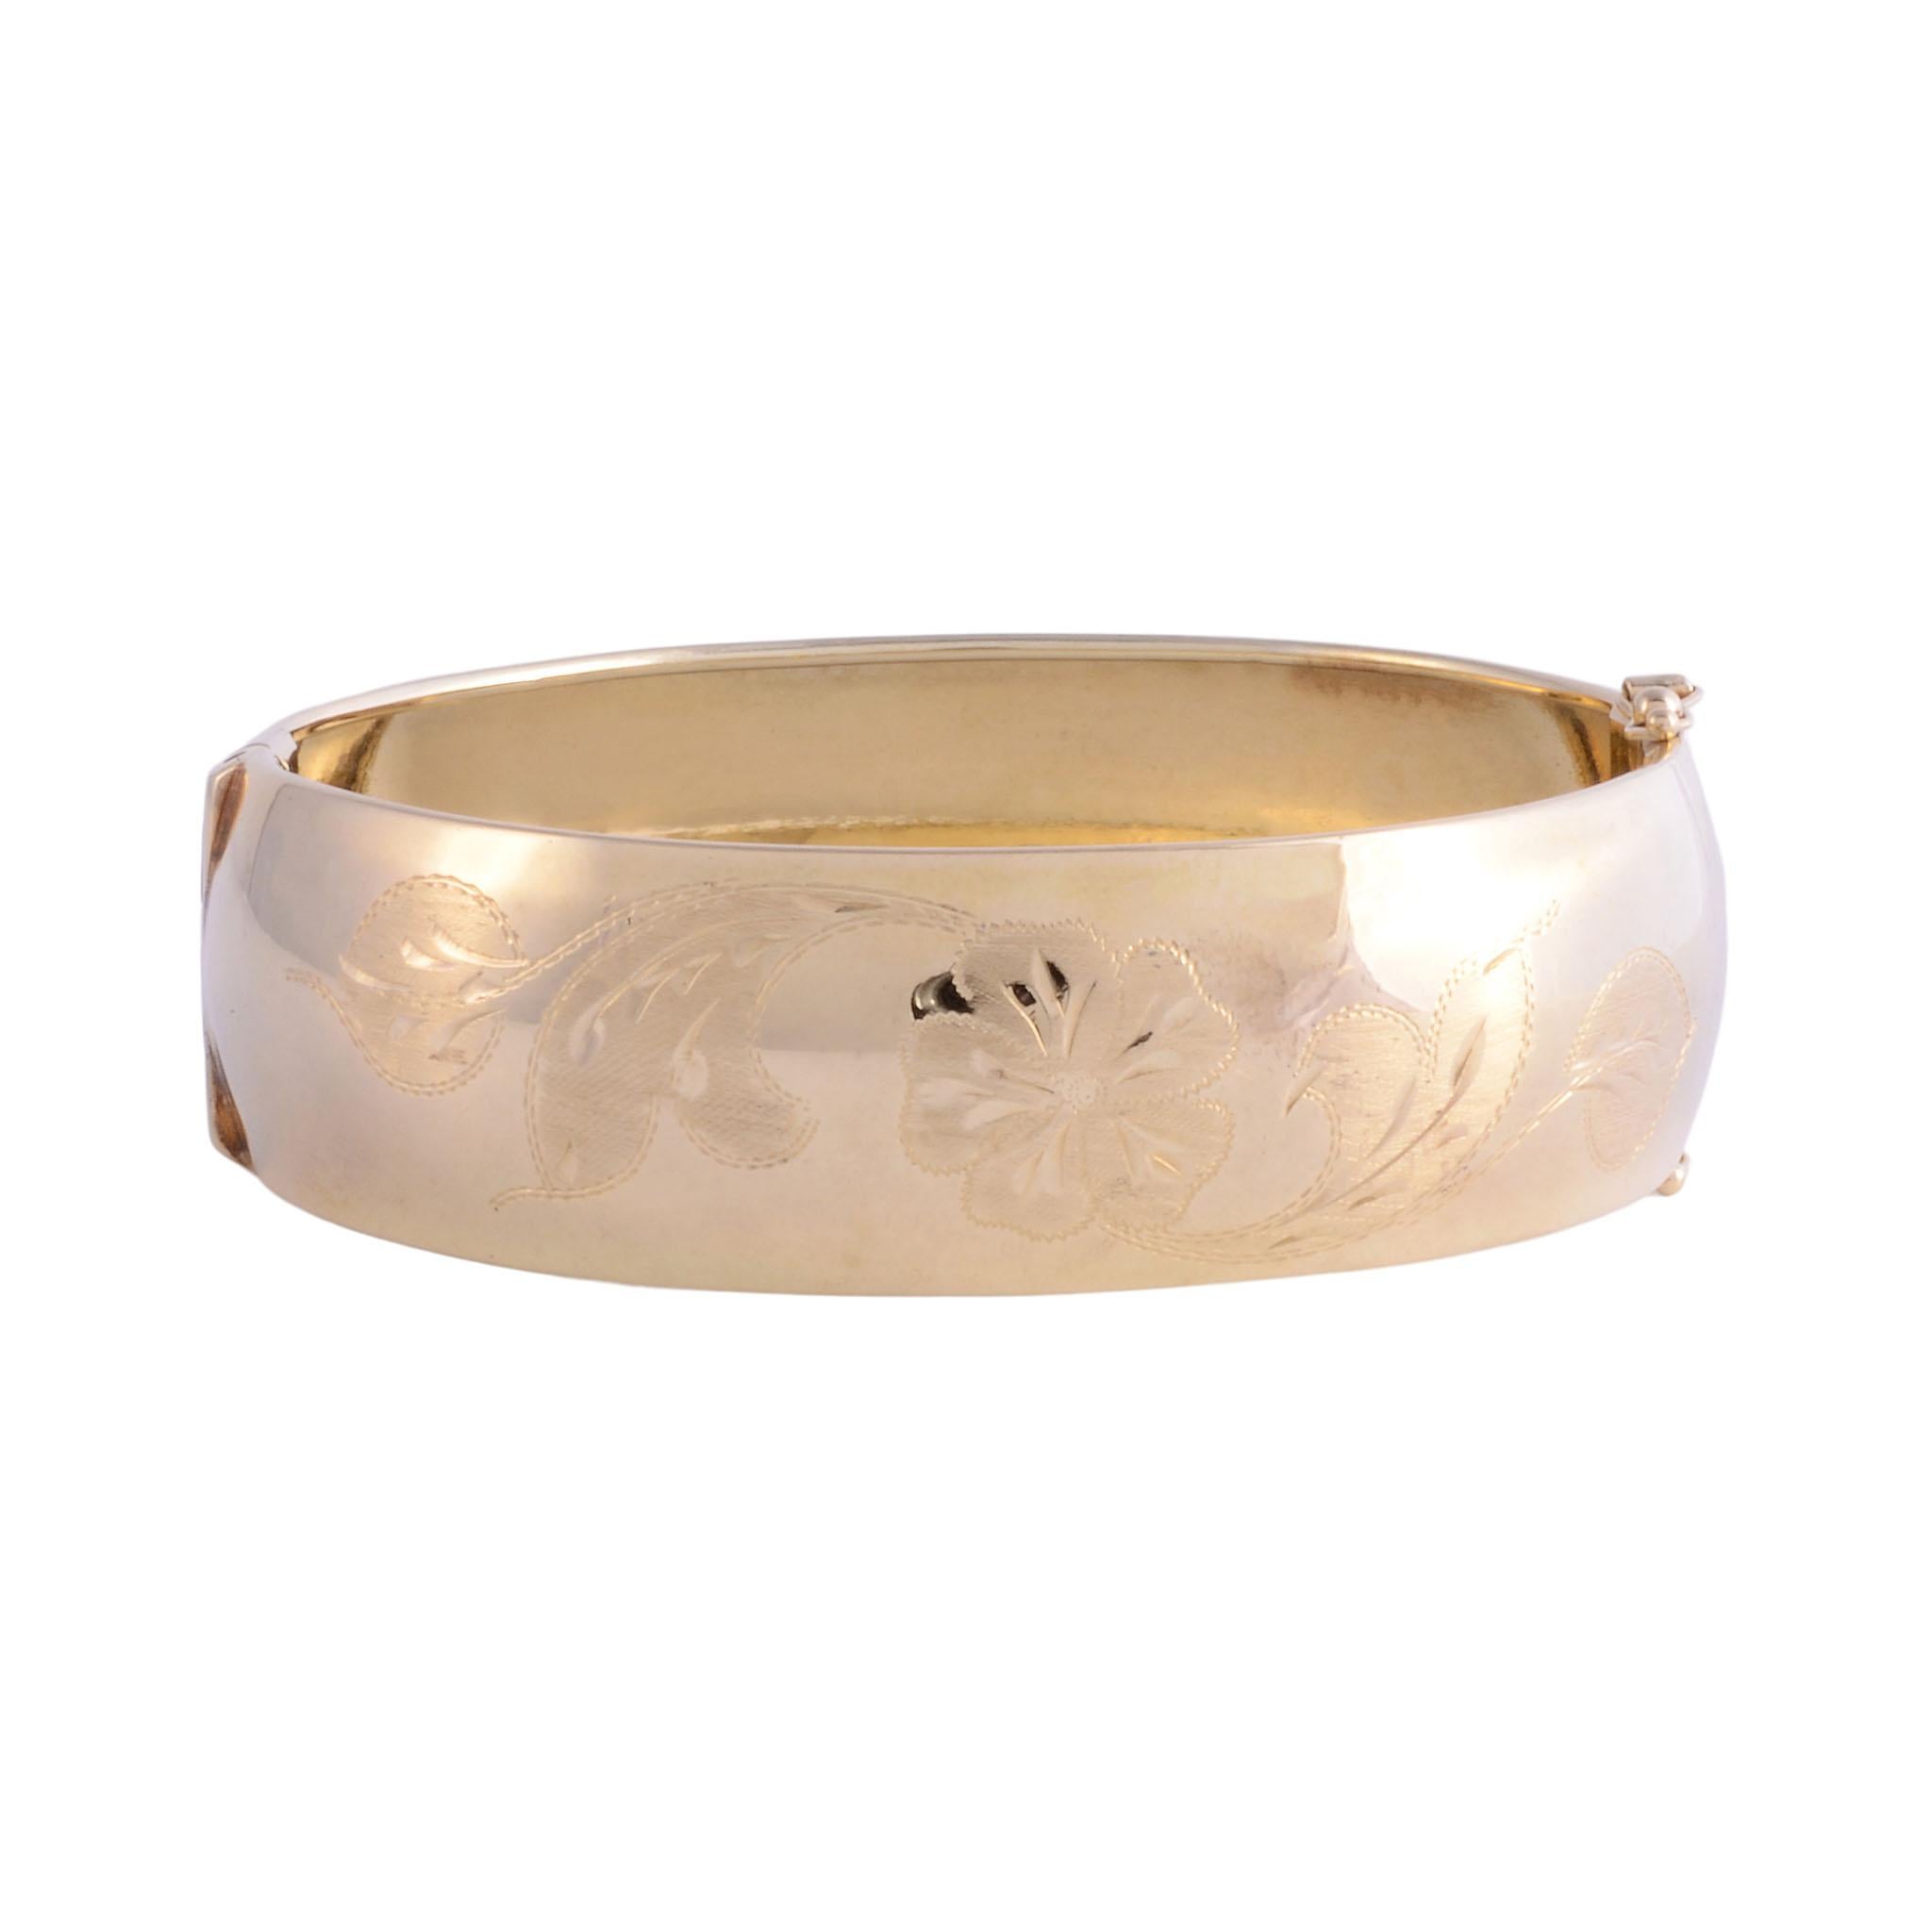 Vintage Italian Faro 14K hand engraved bracelet, circa 1950. This 14 karat gold bracelet is hand engraved and marked Faro Italy. This vintage Faro bracelet is in excellent condition. [KIMH 523]

Dimensions
19.75mm W; 28 grams; 7.5″